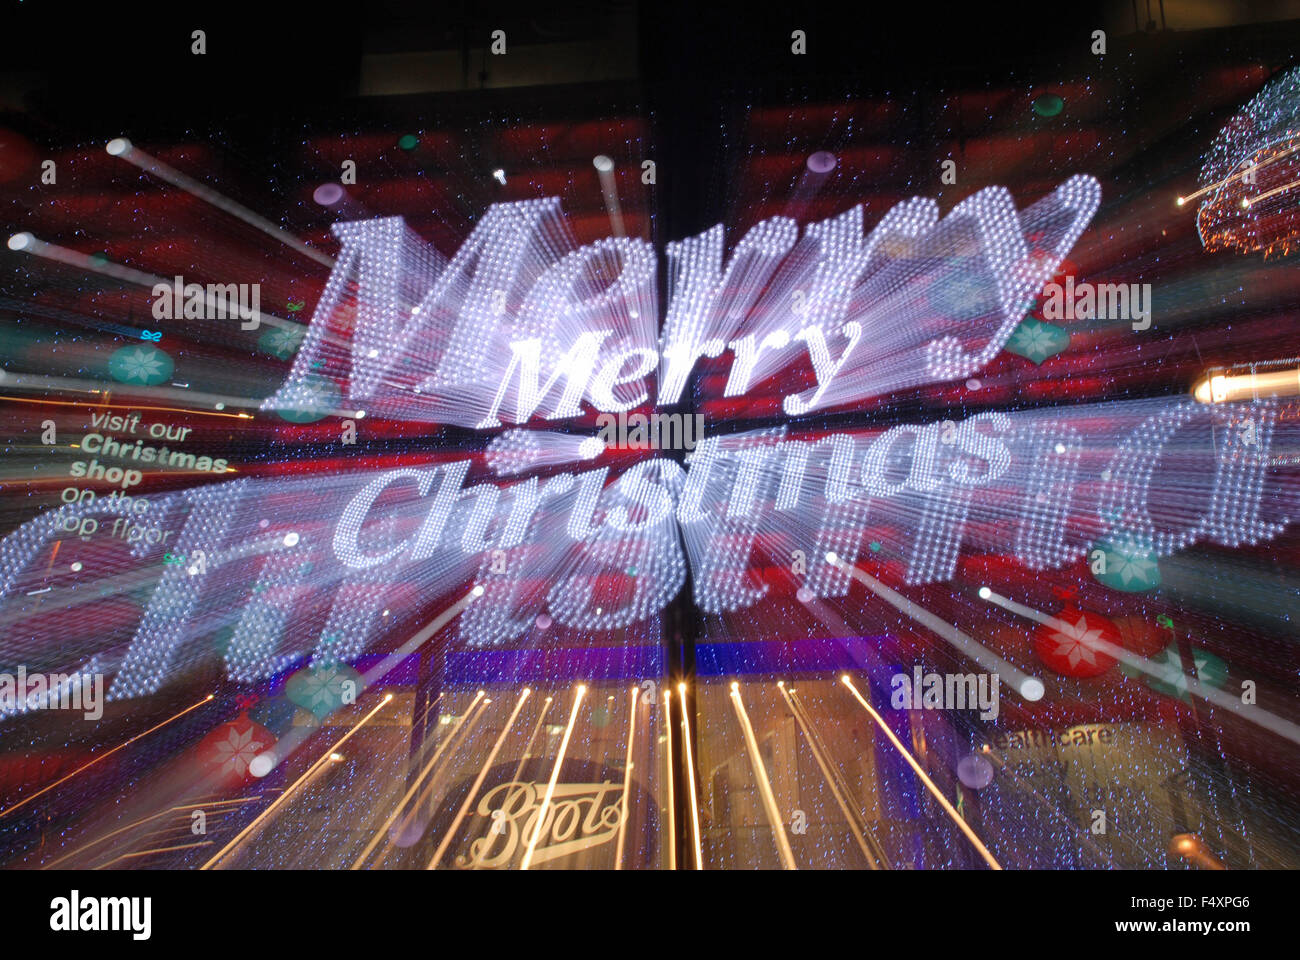 Merry Christmas sign lights in shopping area Oxford Street, London Stock Photo